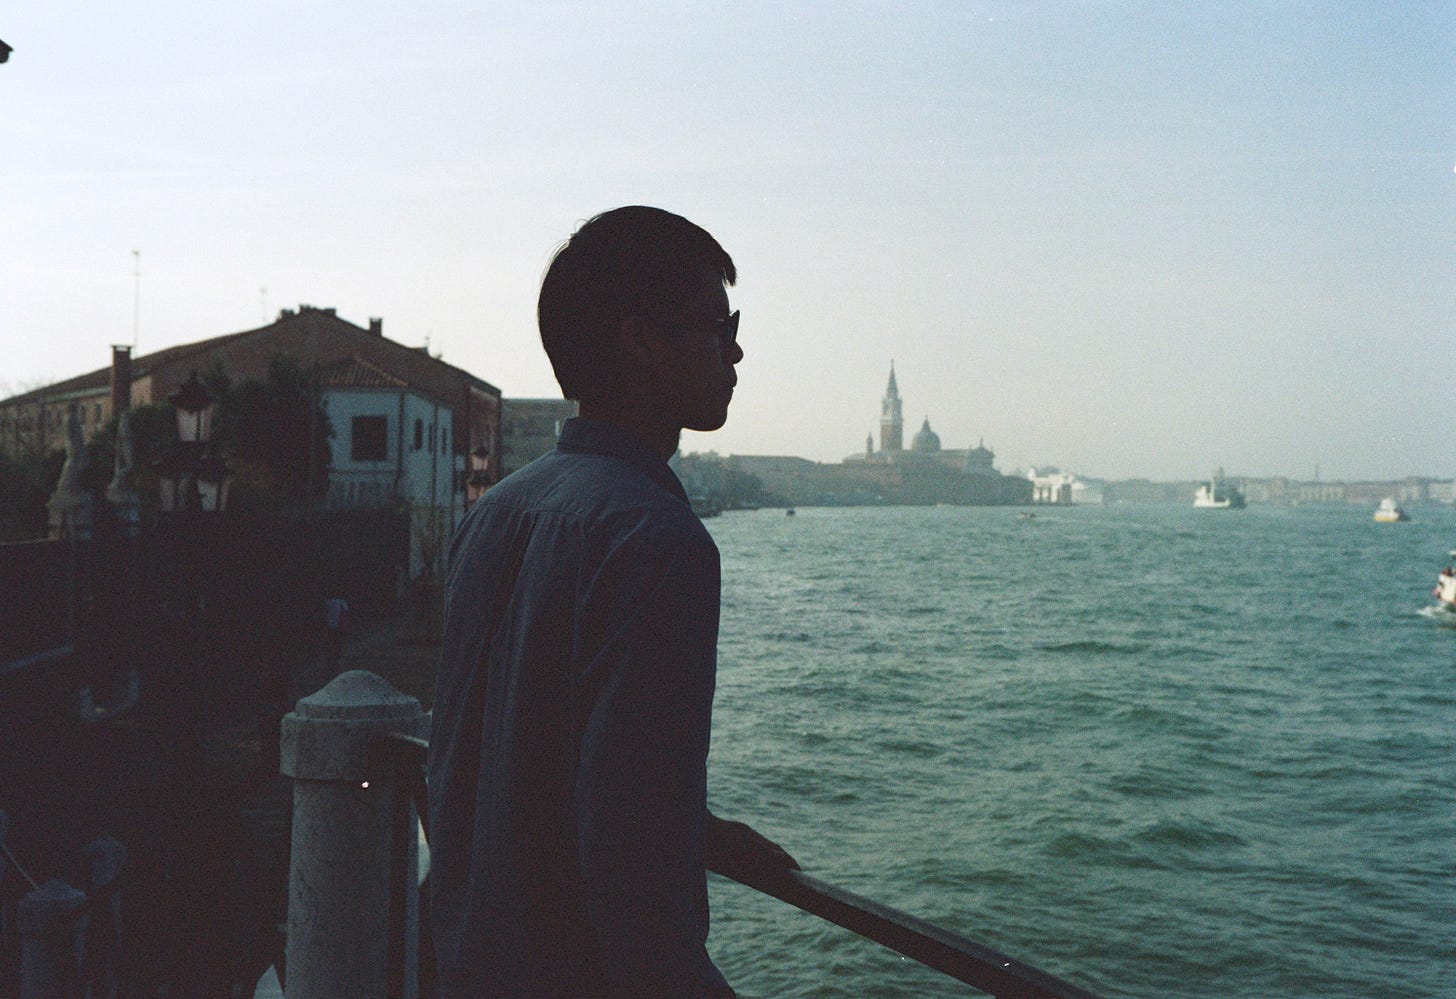 An Asian man looks over the canals of Venice as ships go by.